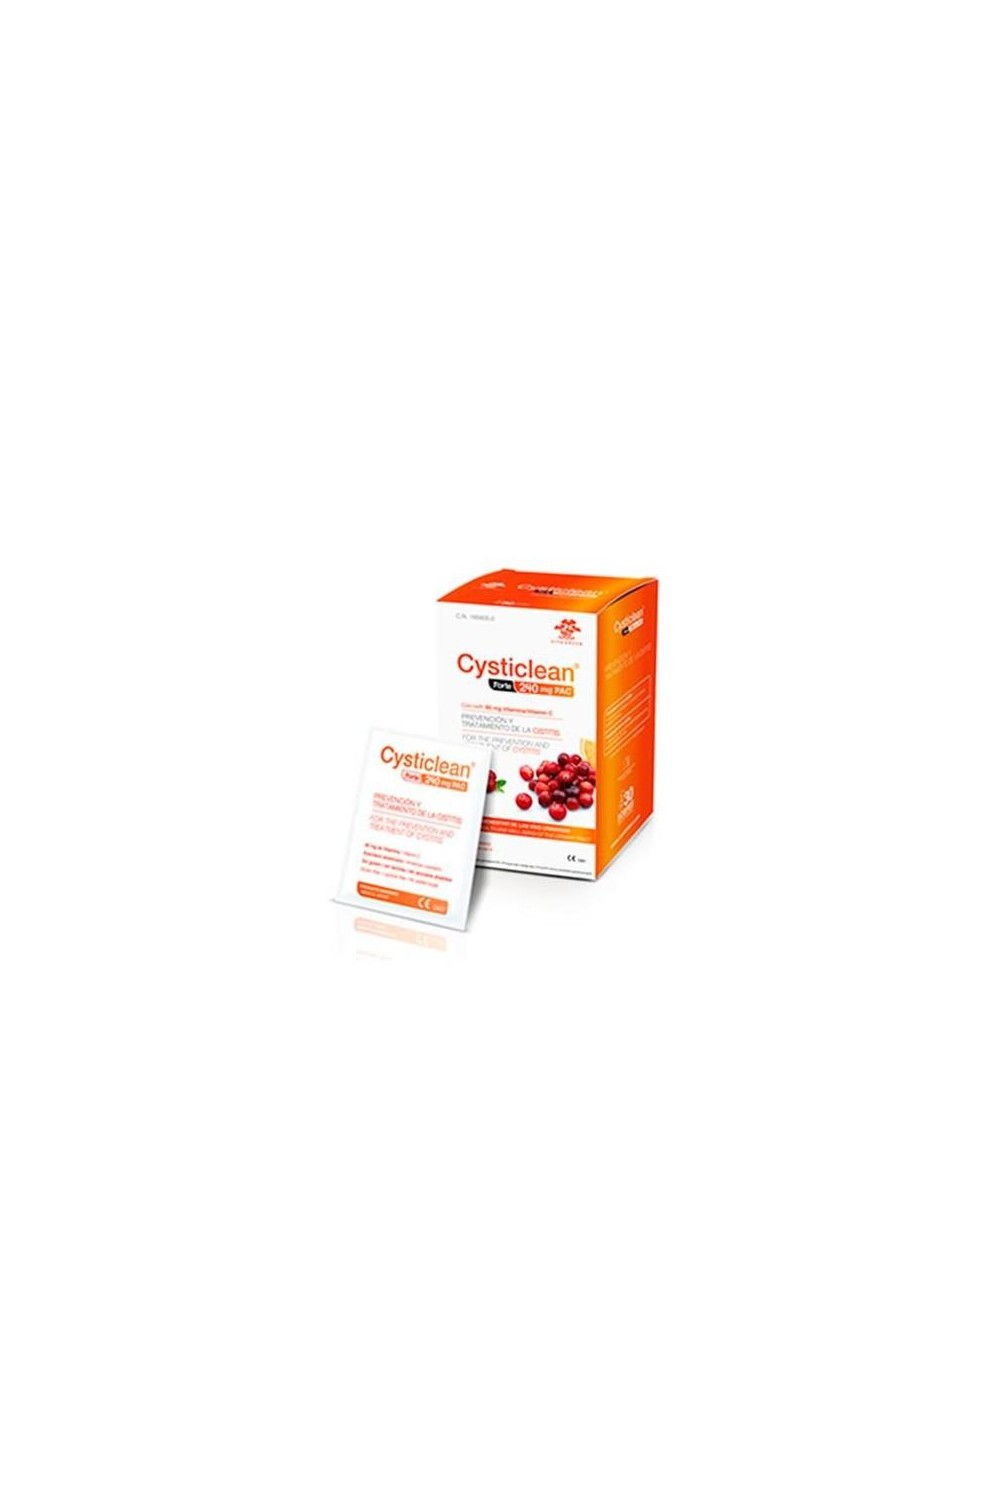 Cysticlean Forte 240 Mg 30 Envelopes